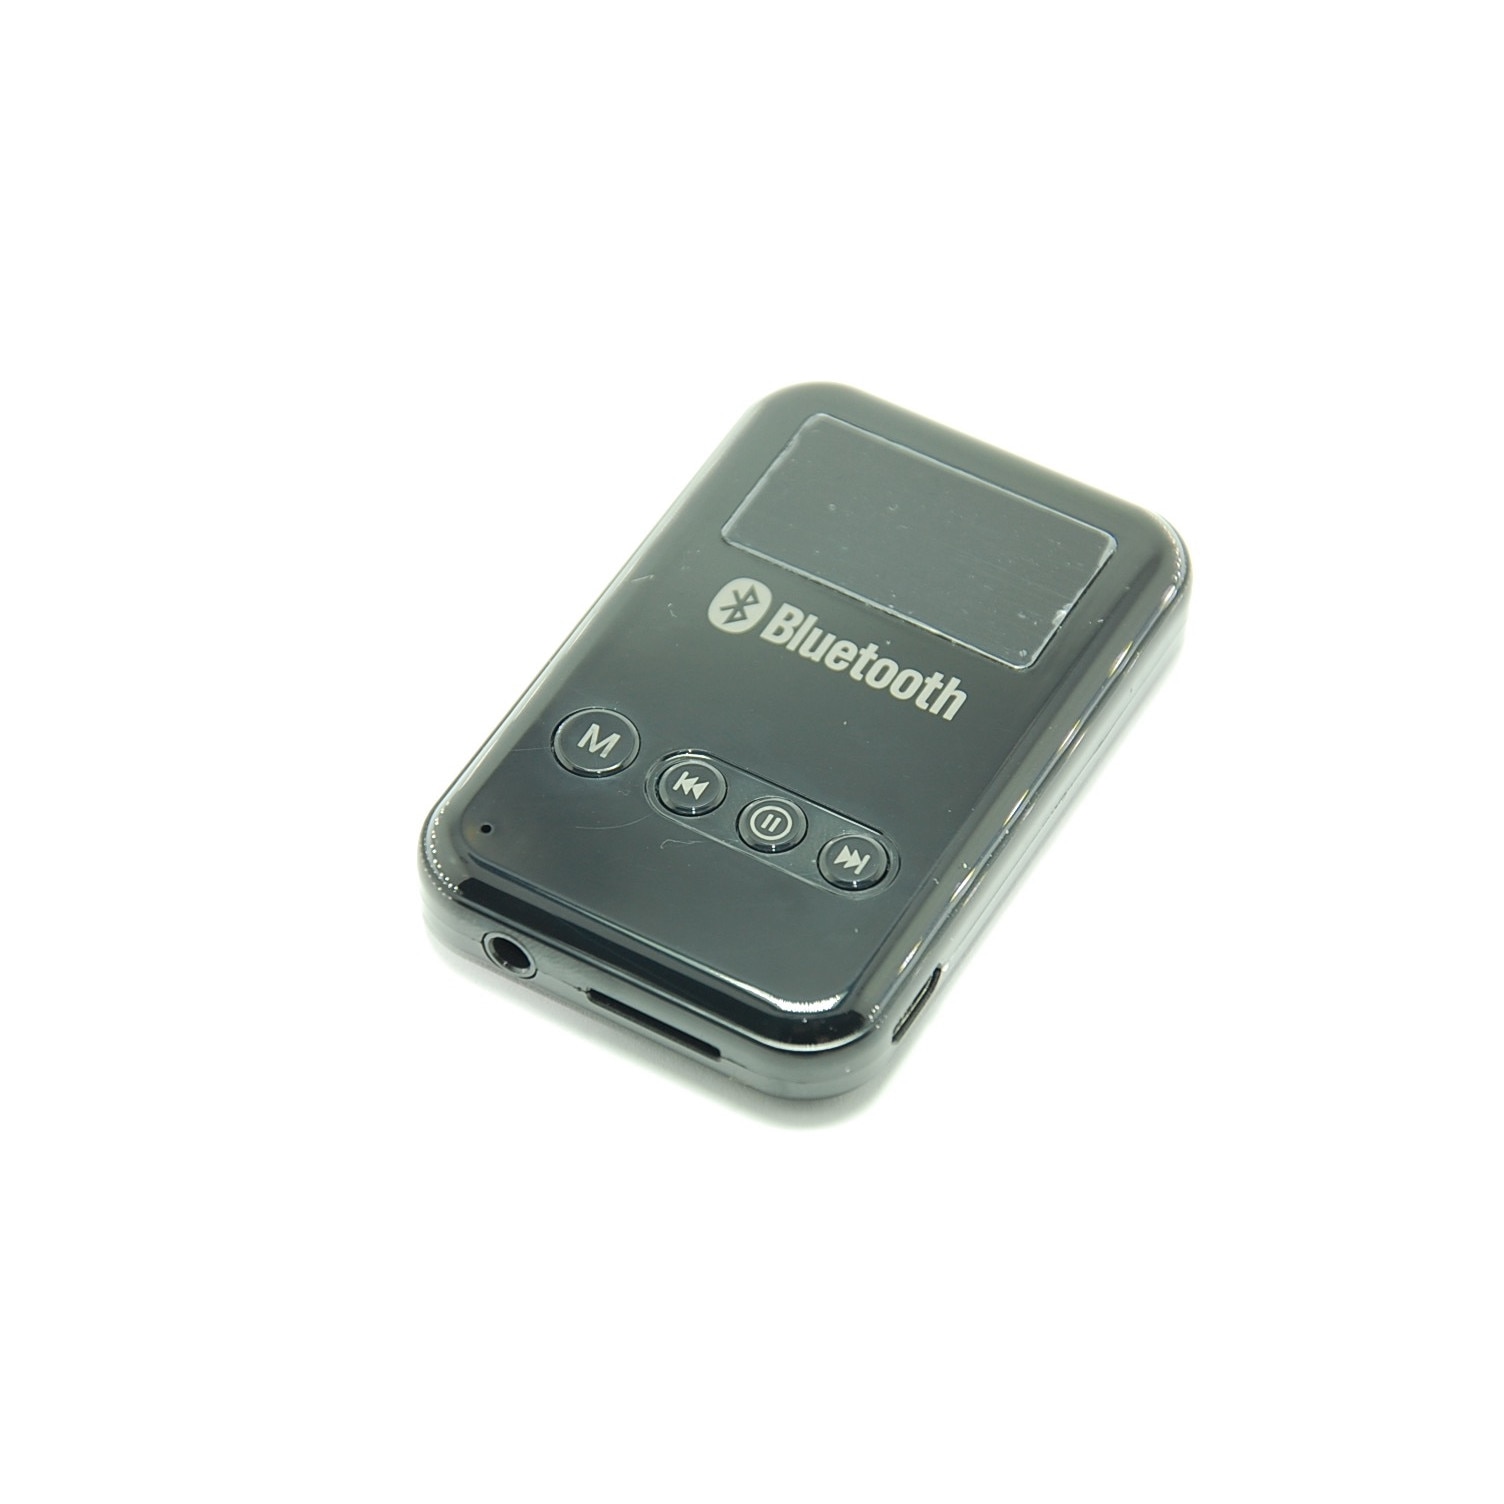 Orkaan Transparant Moskee Modul Transmitter Receiver audio bluetooth 5.0, micro sd card - eMAG.ro